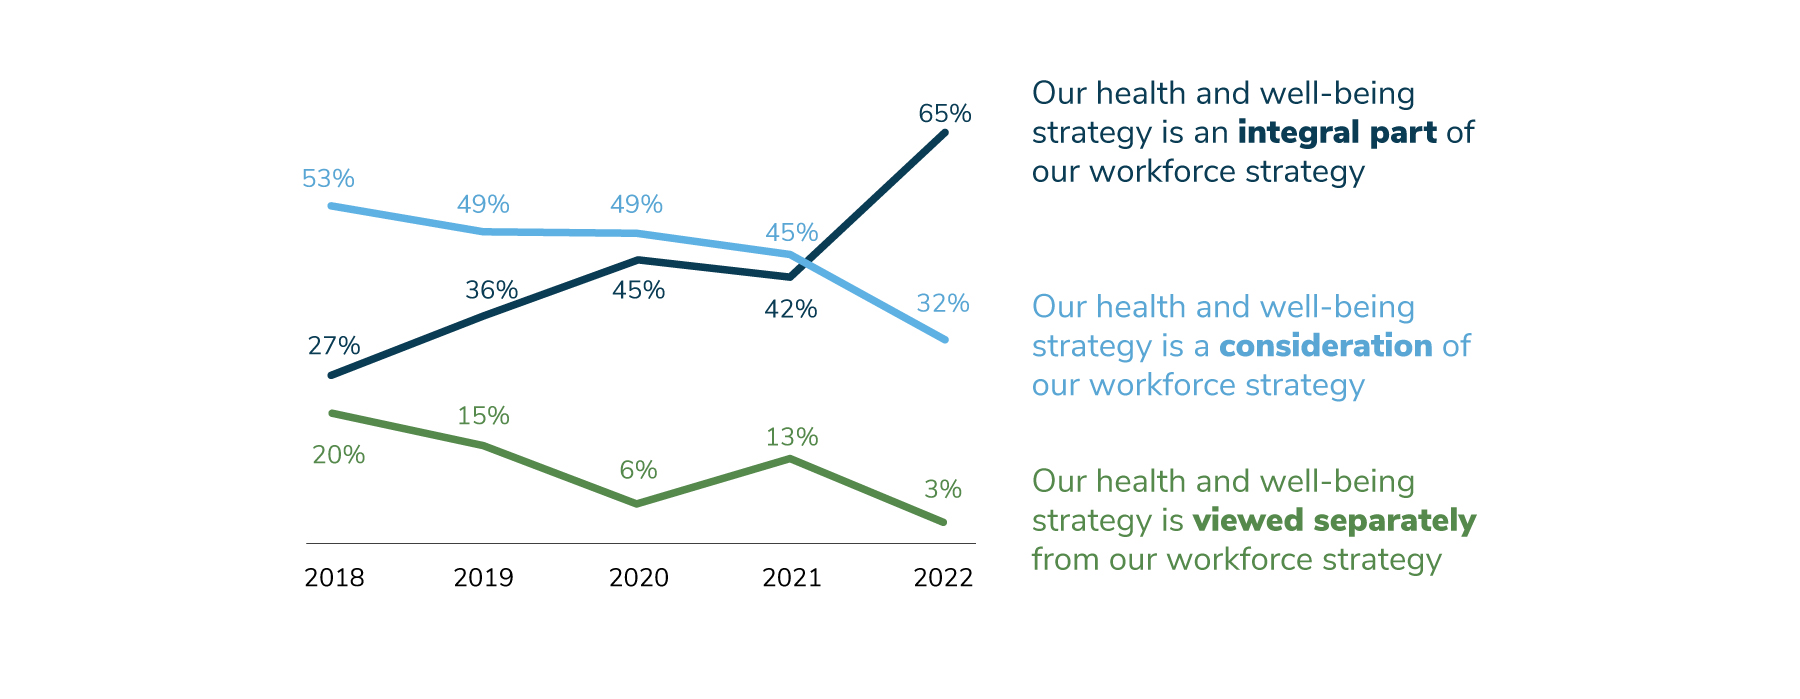 65% of respondents view health and well-being as integral to their workforce strategy, compared to 42% in 2021.